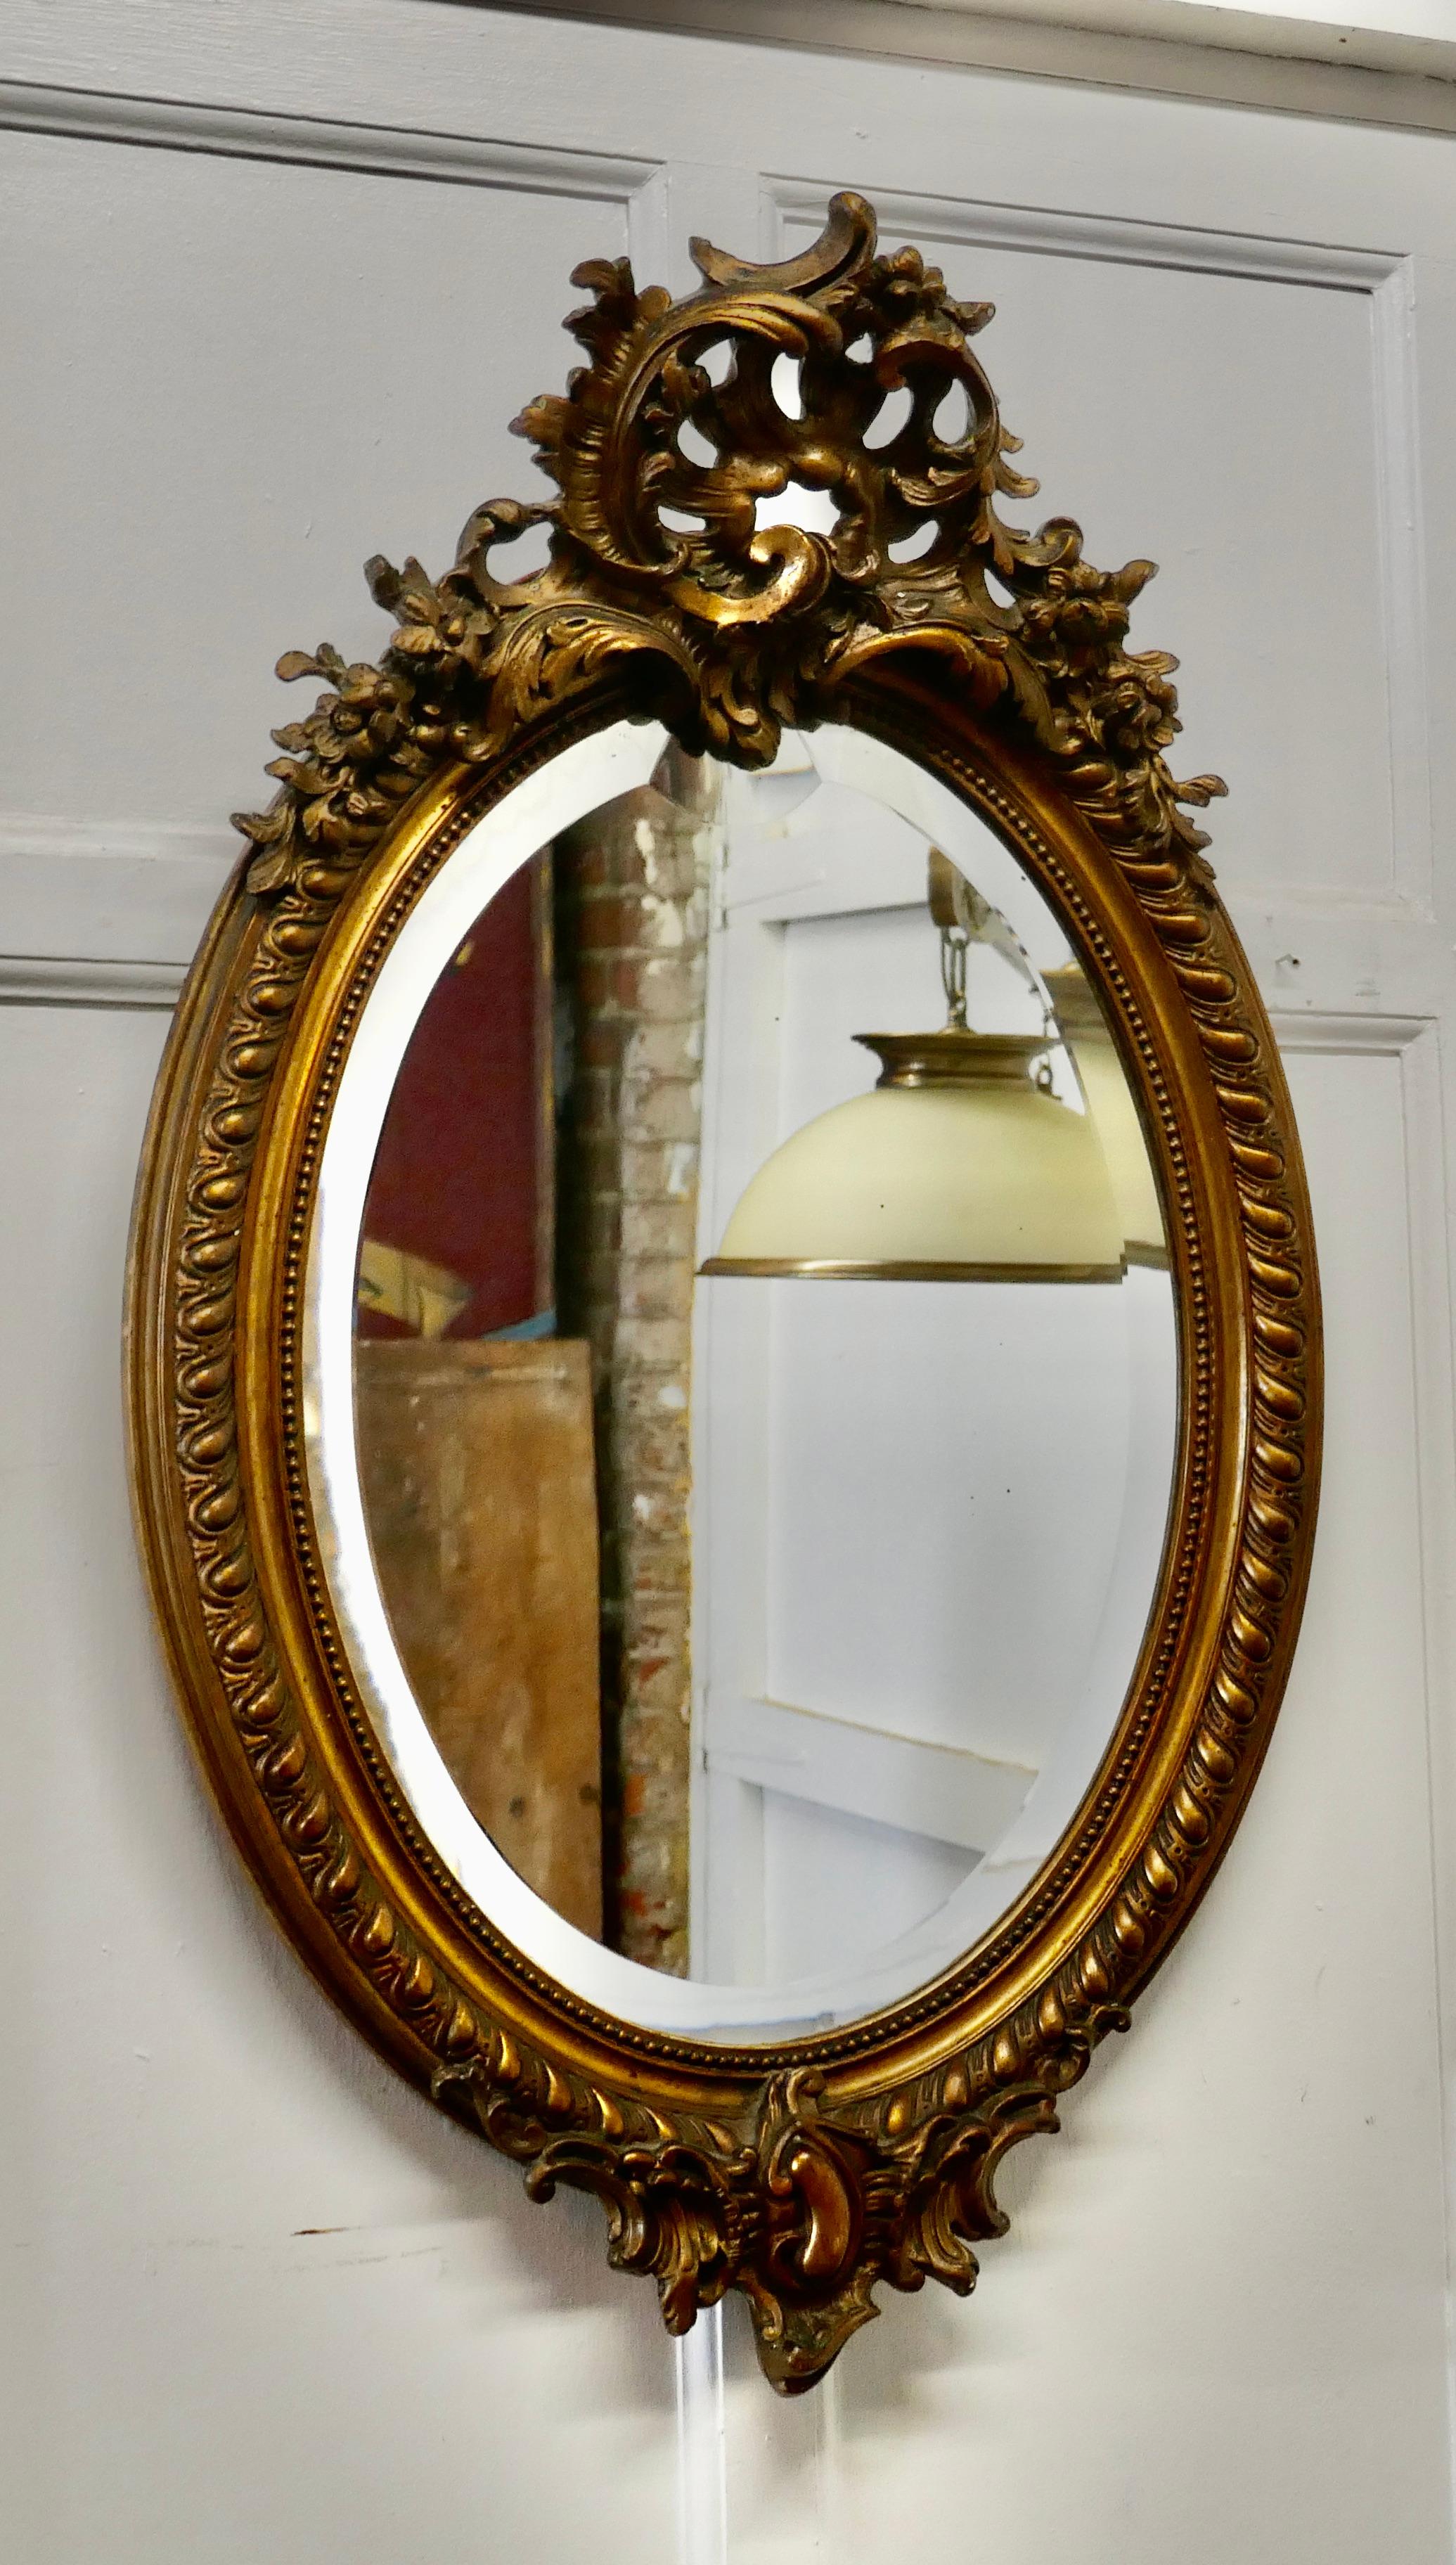 Large French Rococo oval gilt wall mirror

The Mirror has an exquisite gilt Frame in the Rococo Style, it is elaborately decorated with Shells, Swags and Leaves with a twisted rope edge
The large age darkened Oval frame is made in gesso and is in